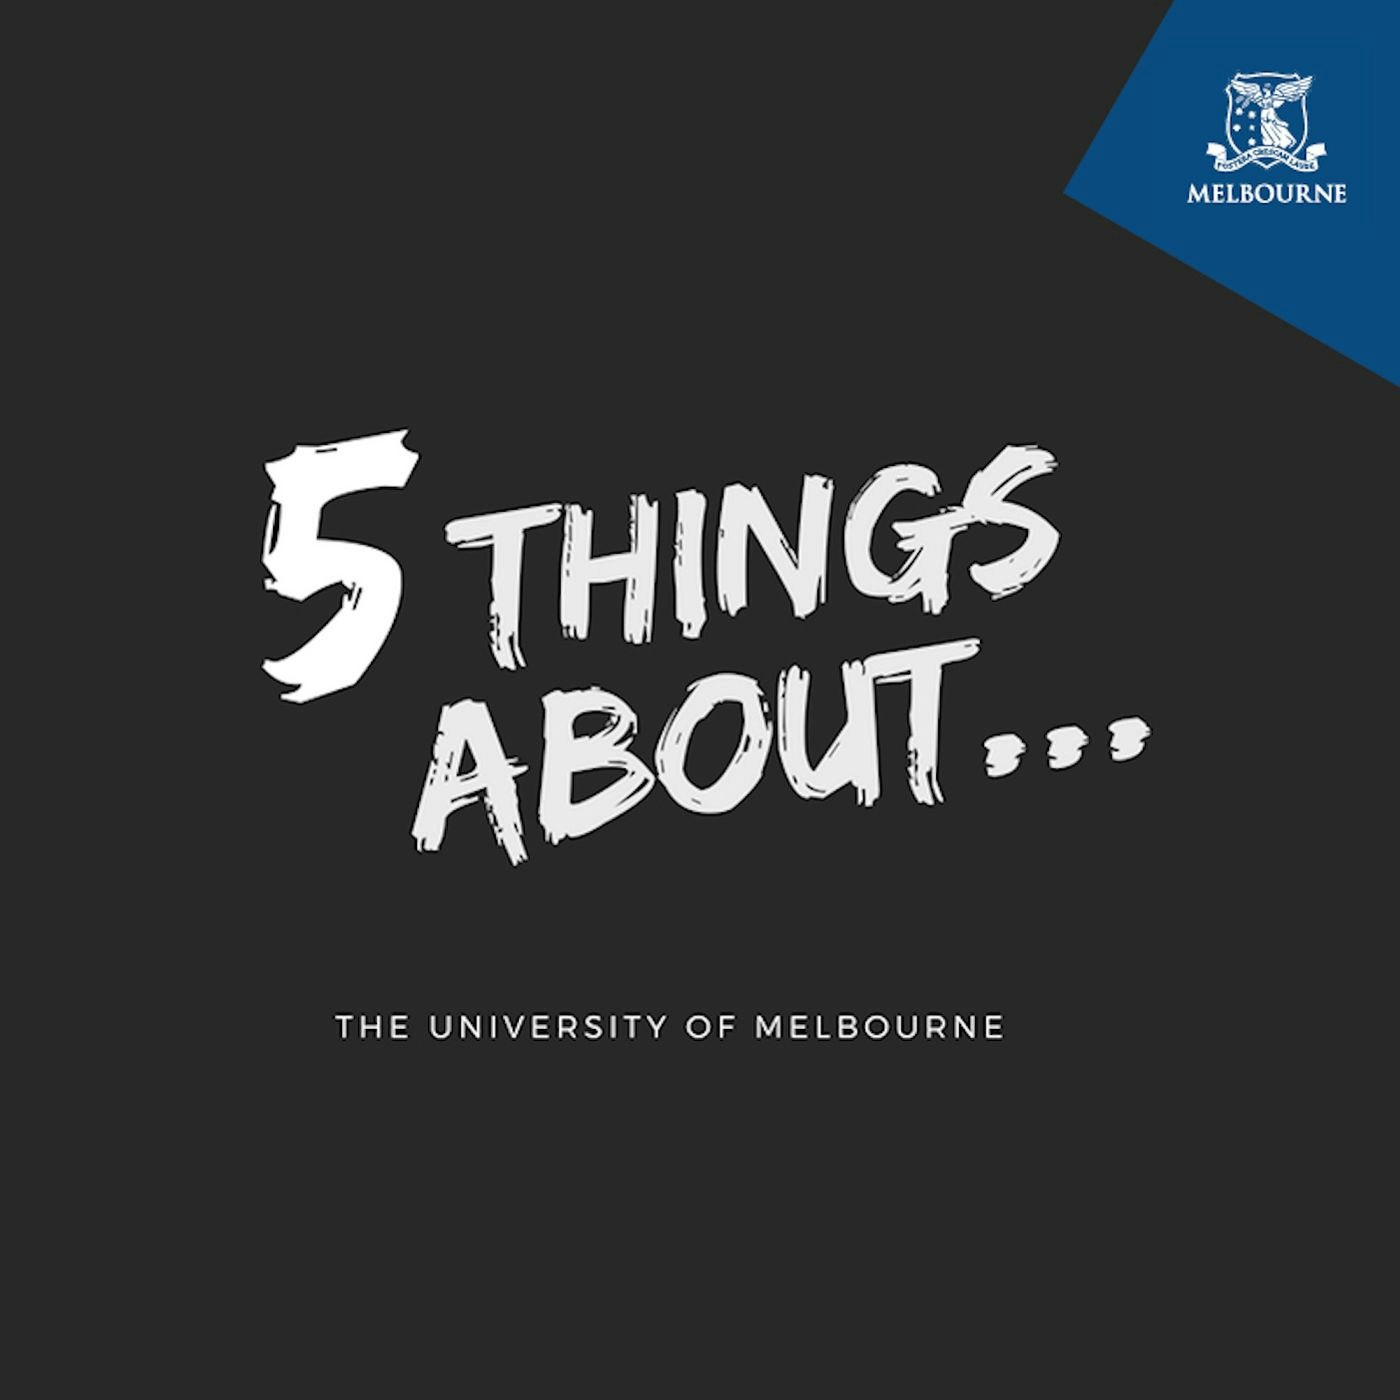 The University’s Indigenous agenda, National Reconciliation Week, and University Services